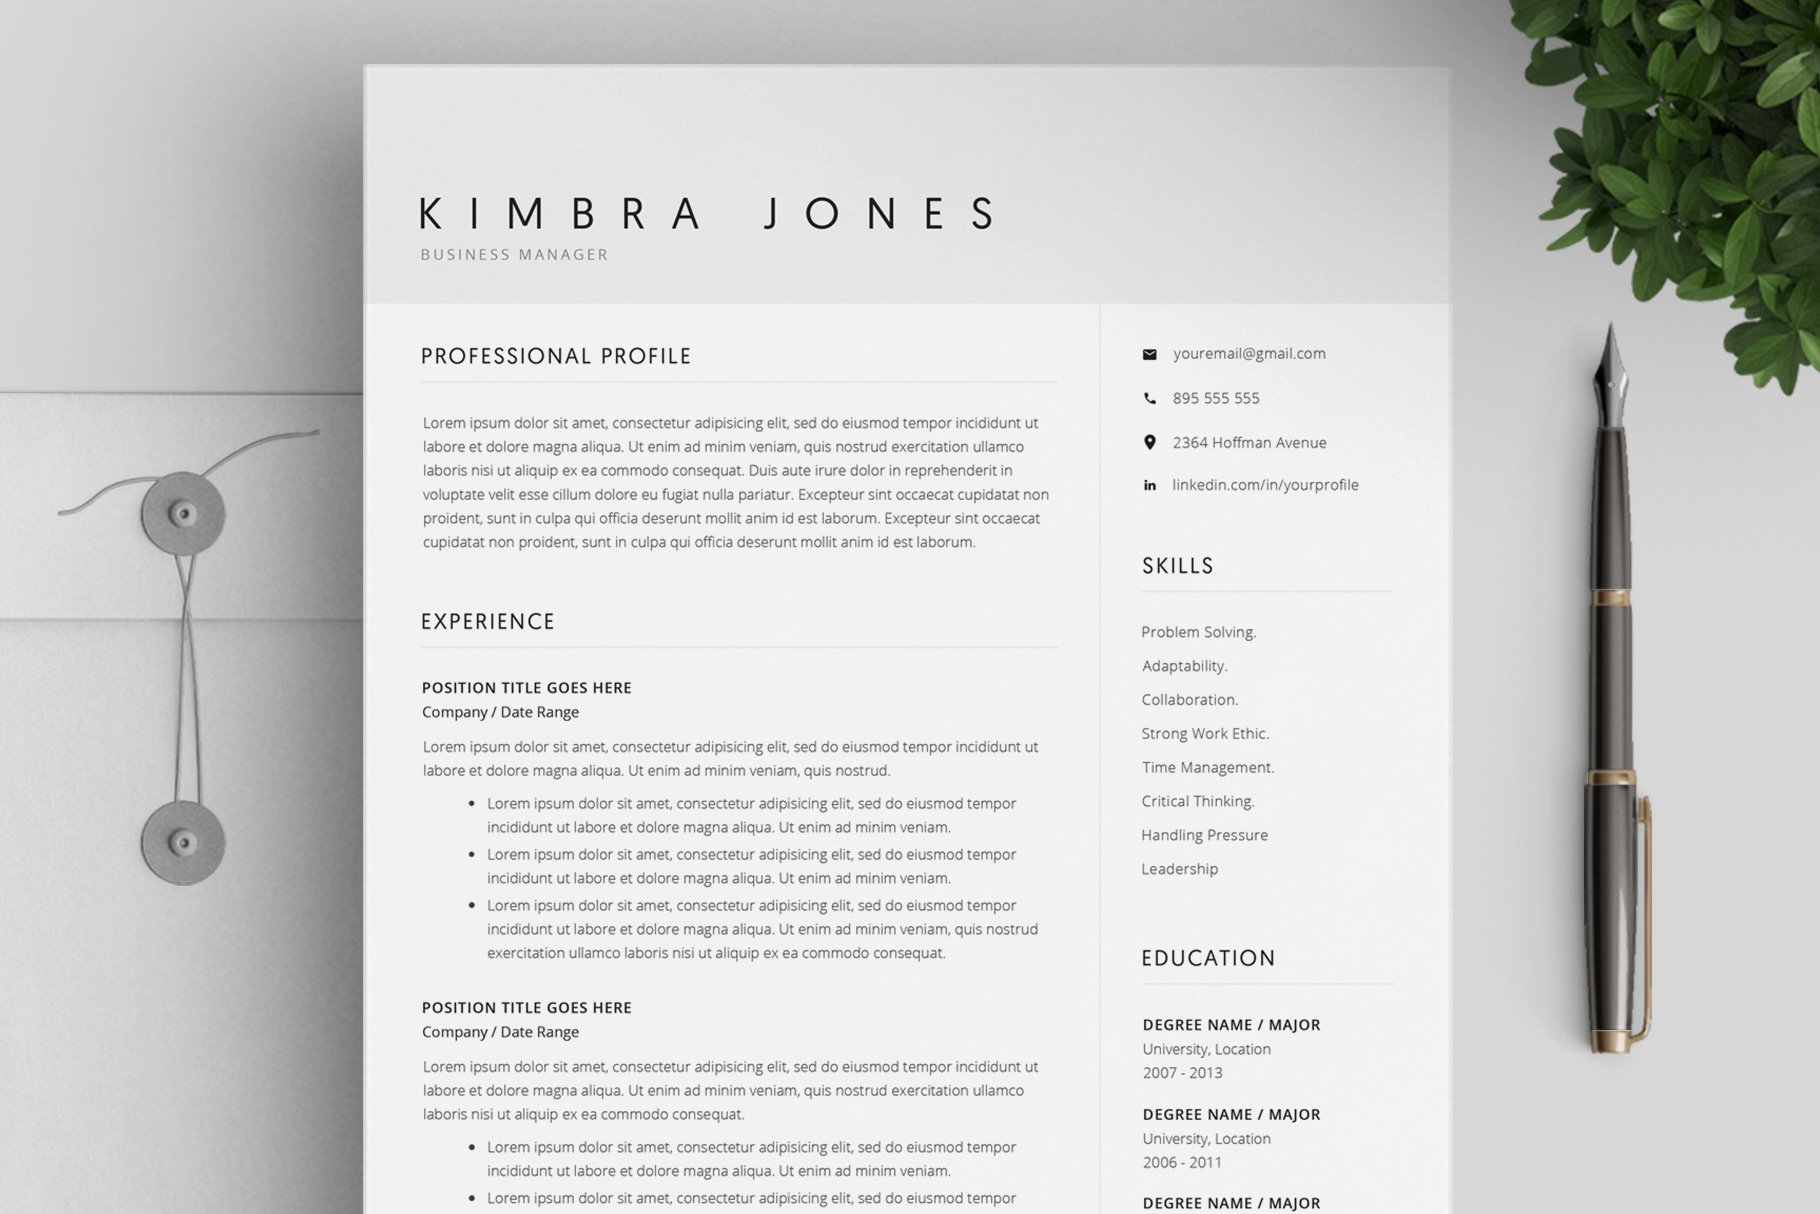 Resume Template / 4 Pages CV cover image.